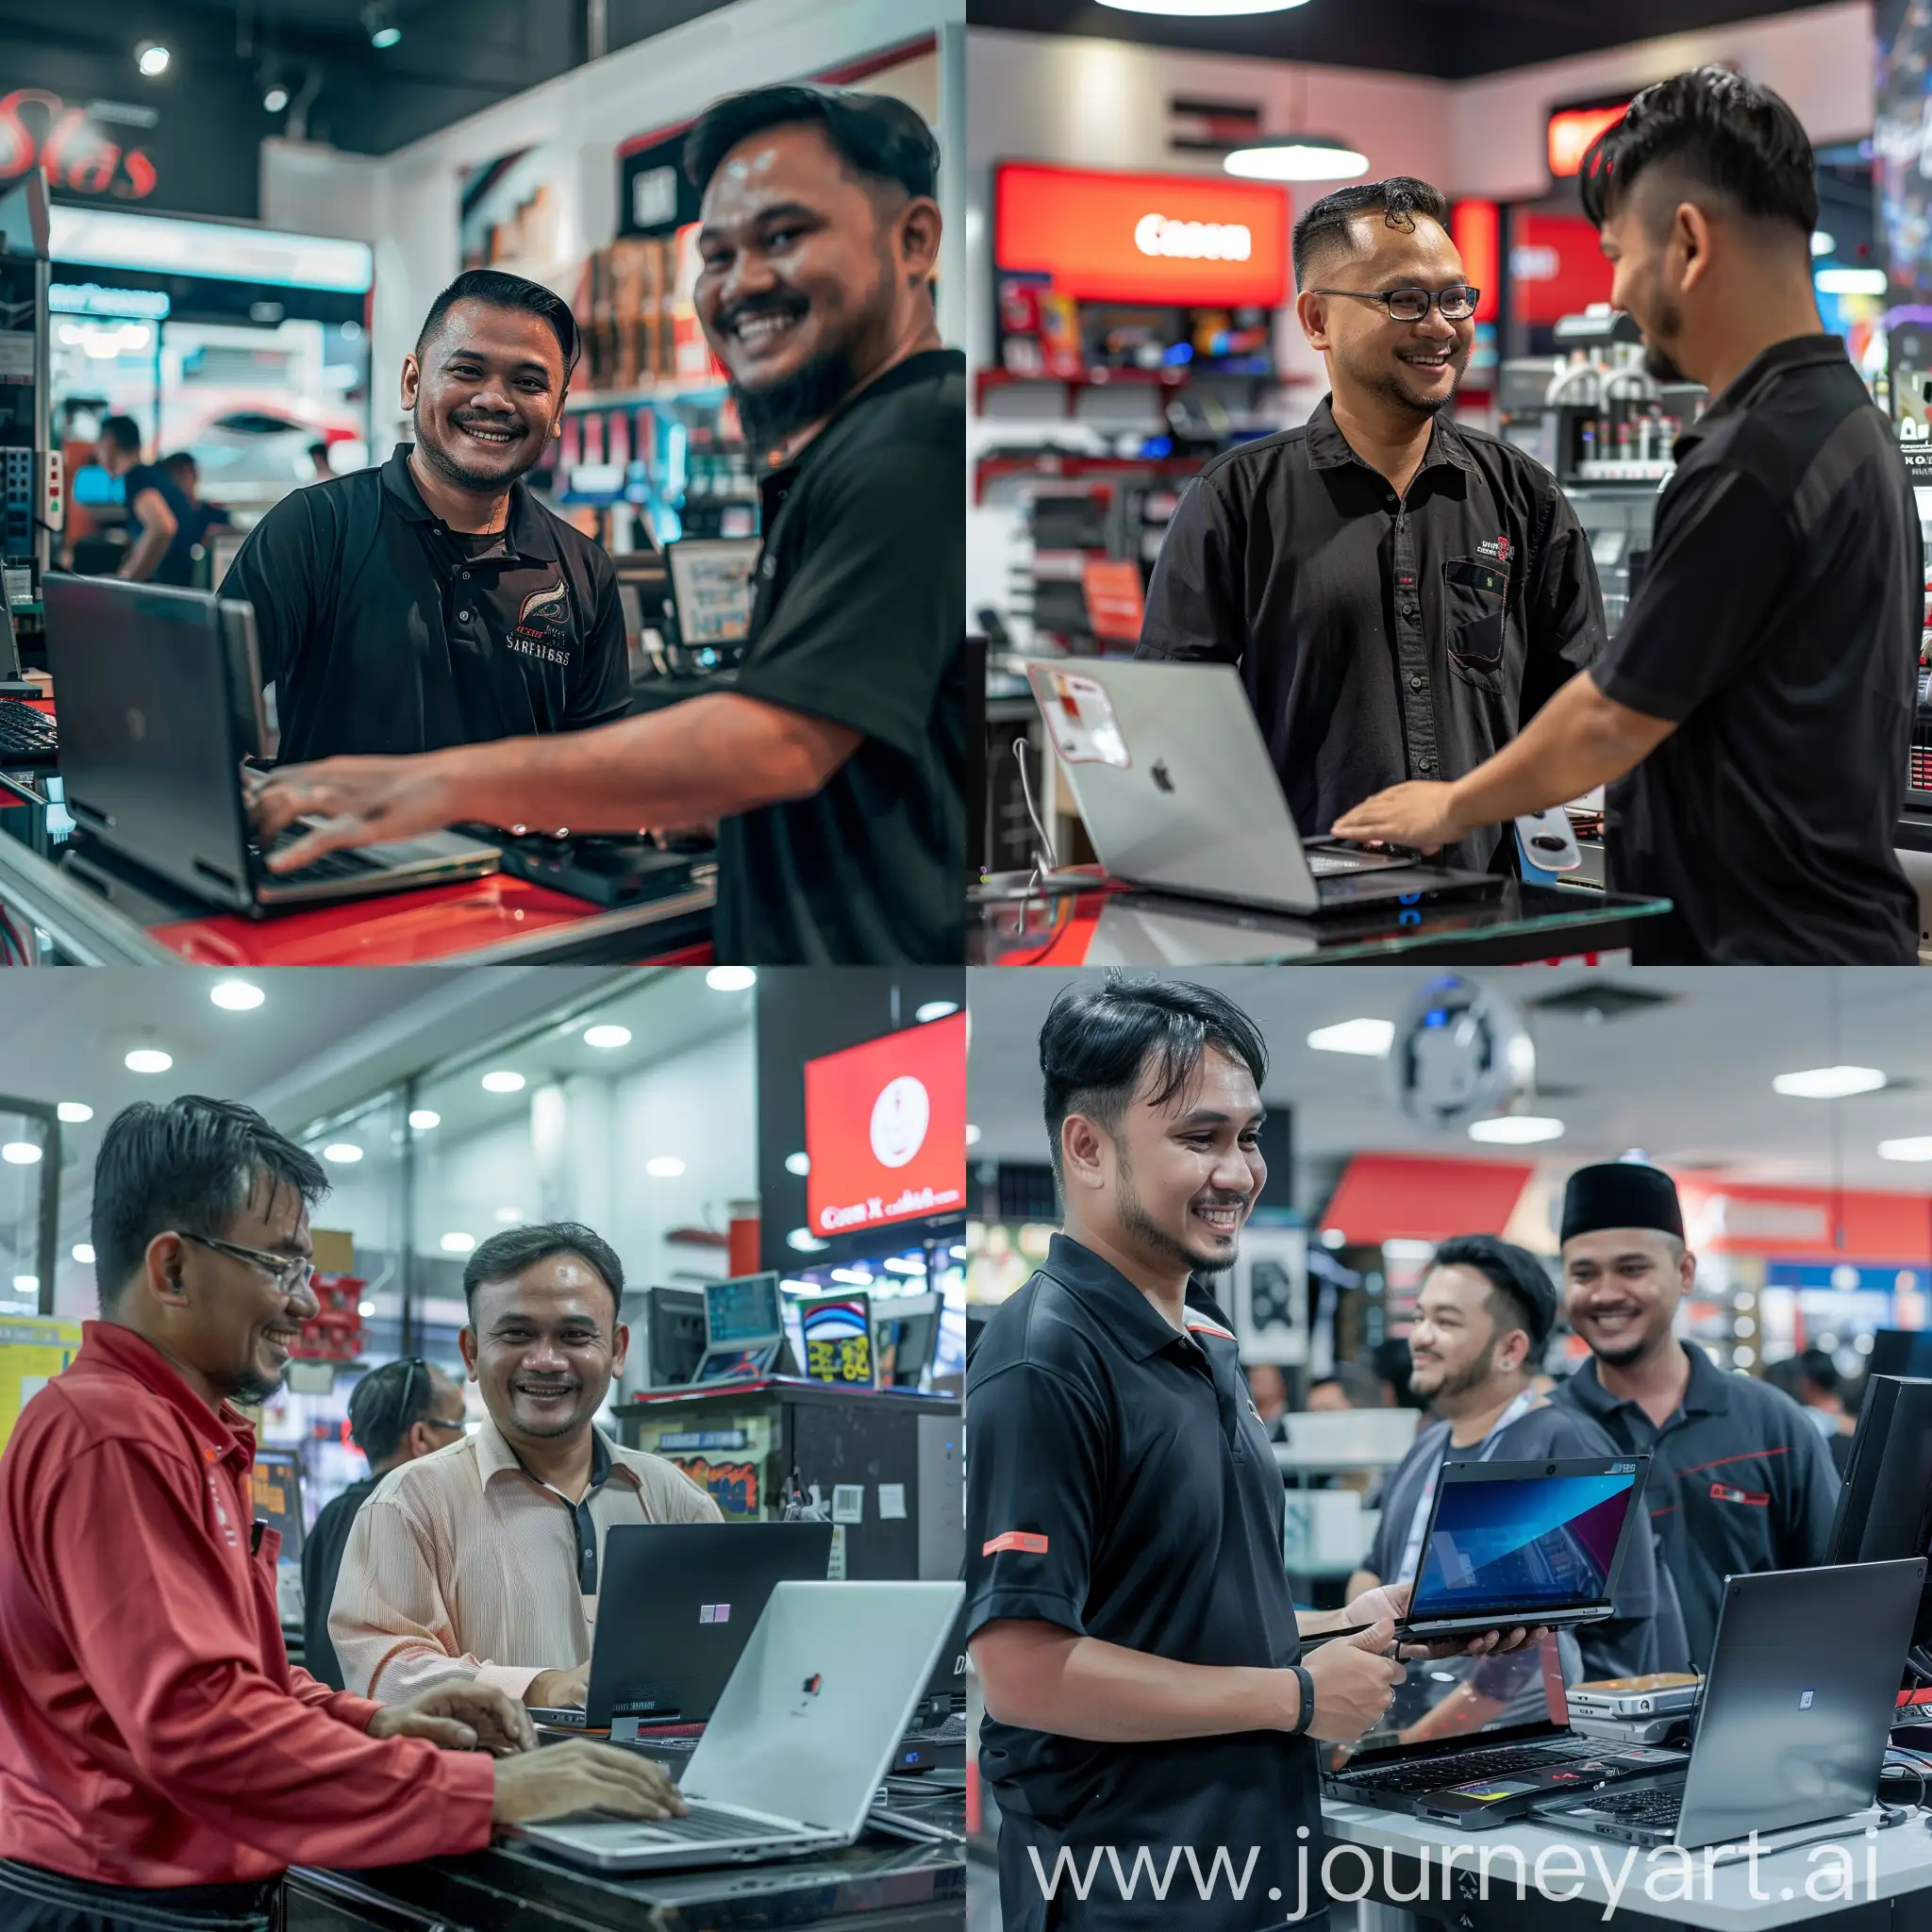 Smiling-Malay-Mechanic-Assisting-Customer-with-Laptop-Purchase-in-Modern-Computer-Shop